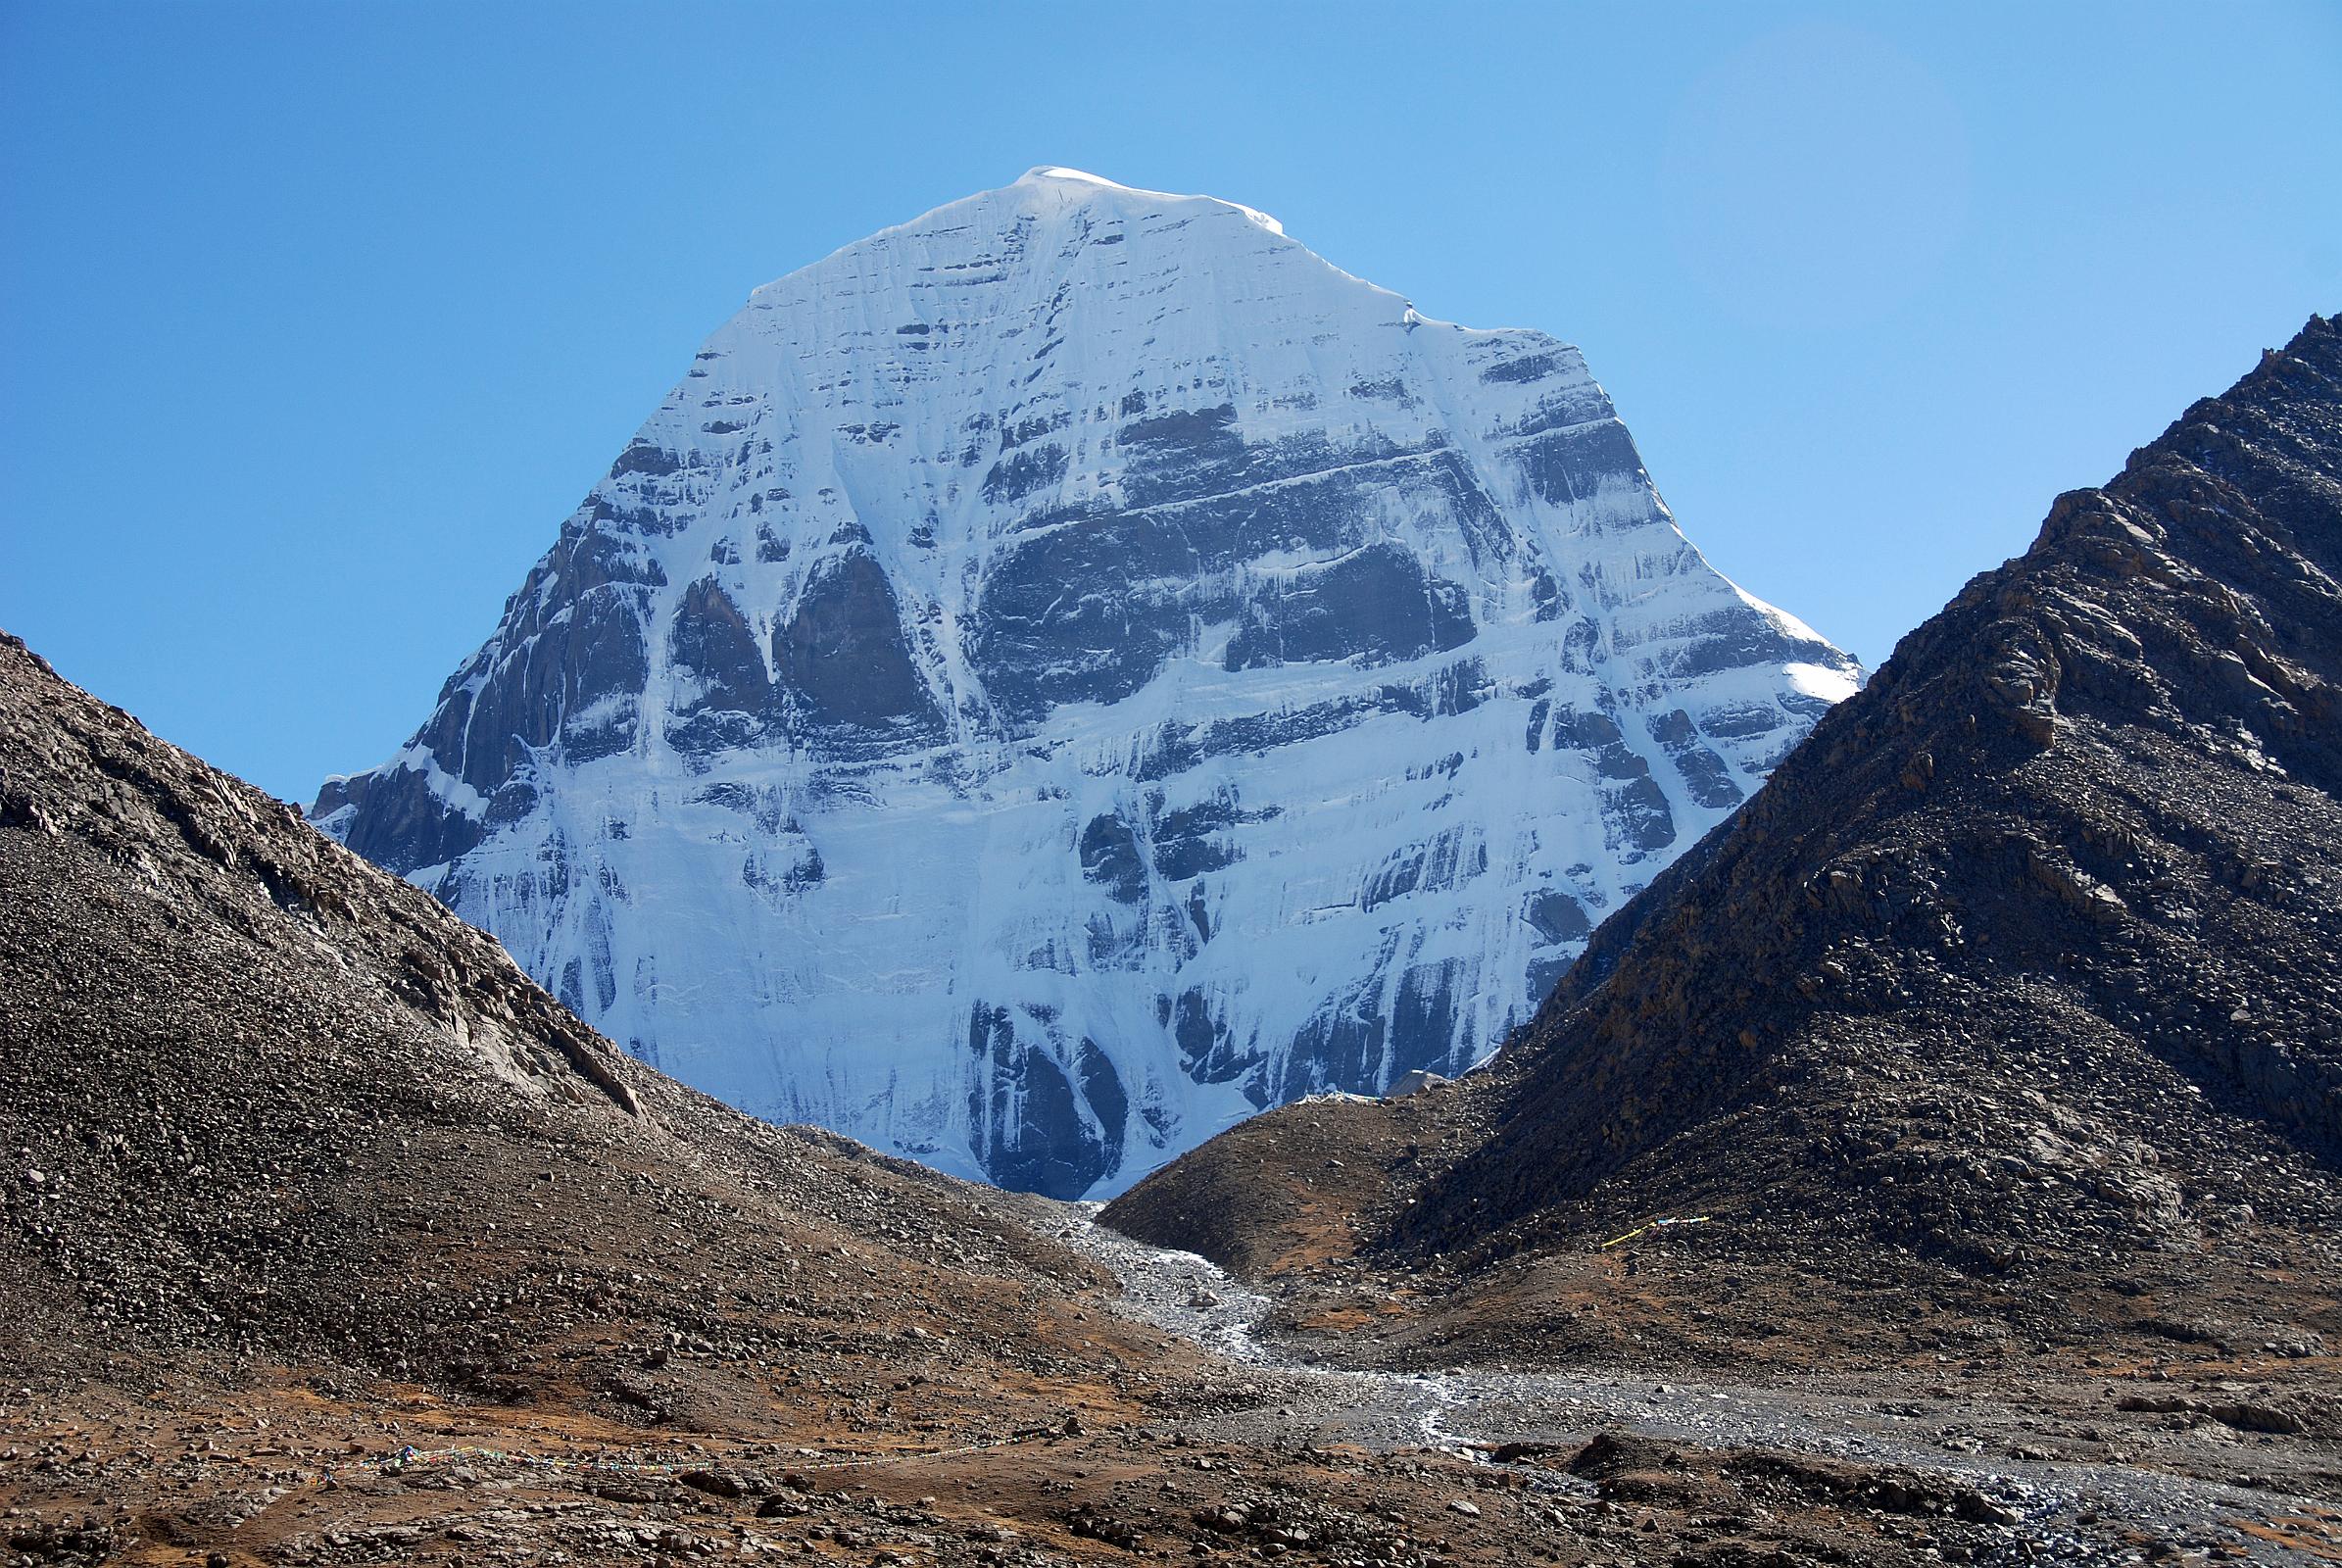 30 Mount Kailash North Face from Dirapuk Gompa On Mount Kailash Outer Kora There is a perfect view of Mount Kailash North Face from Dirapuk Gompa.